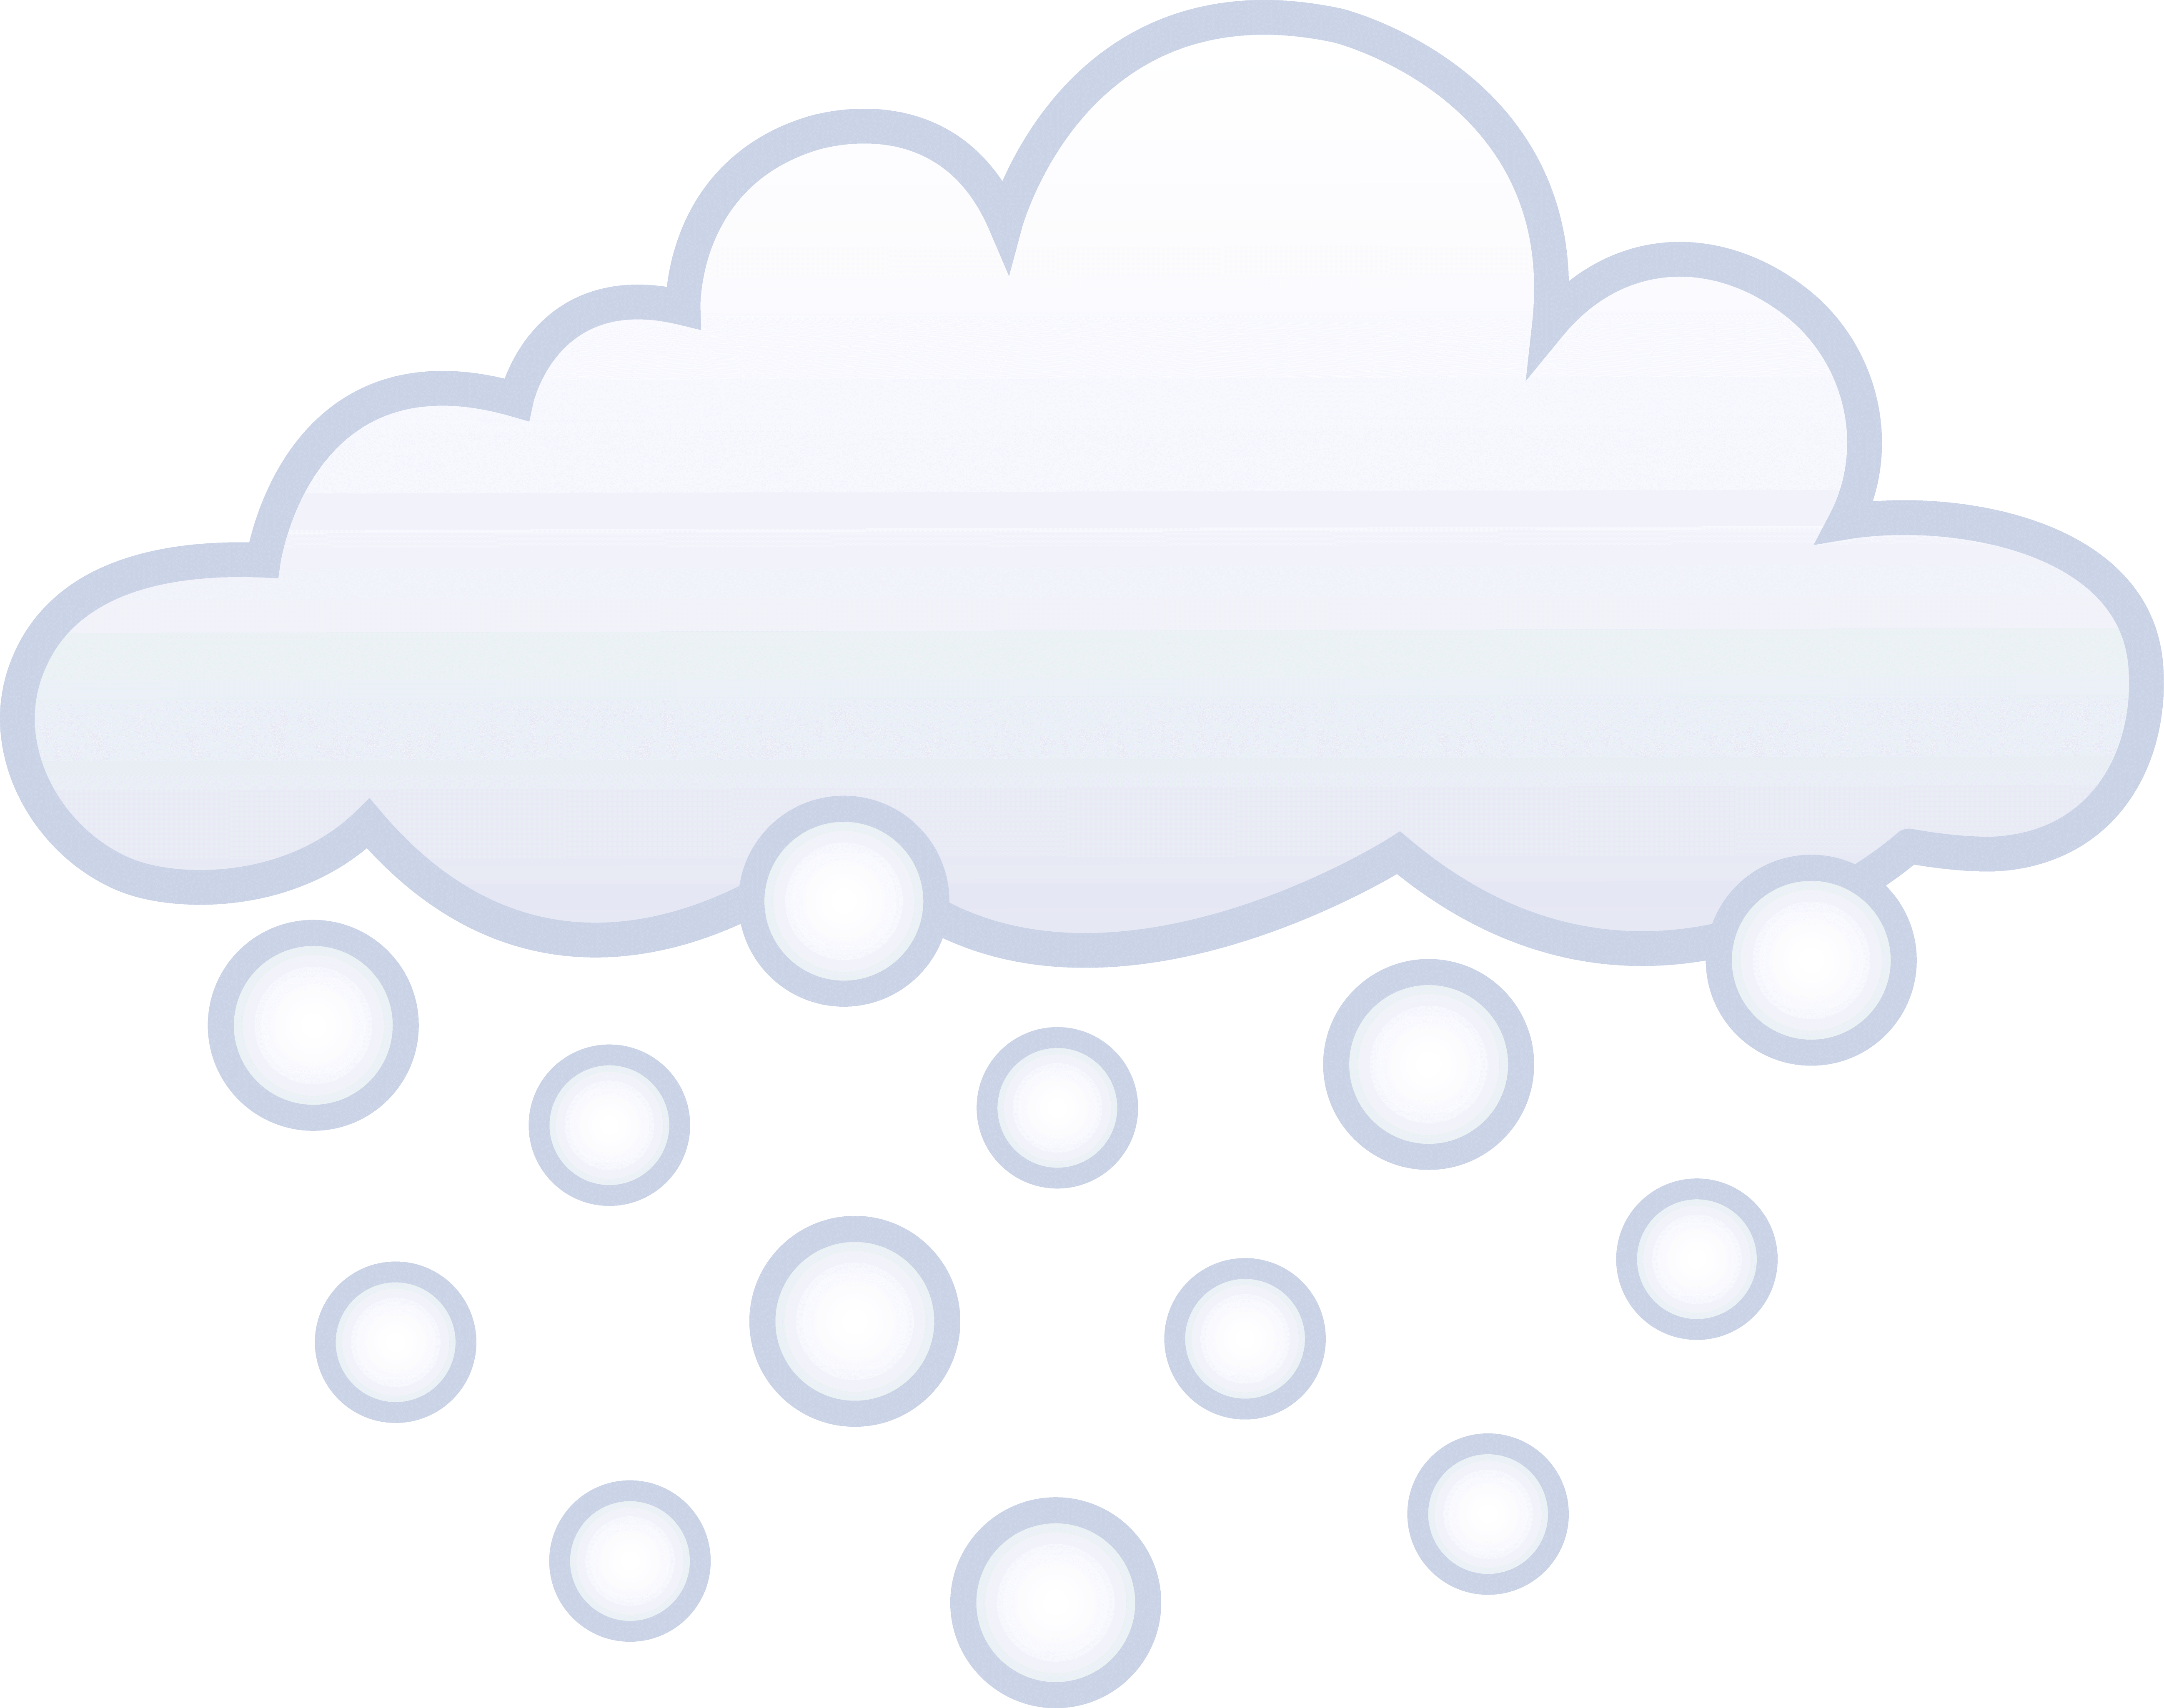 Snowing Pictures - Snowy Clouds Cartoon (5192x4099)